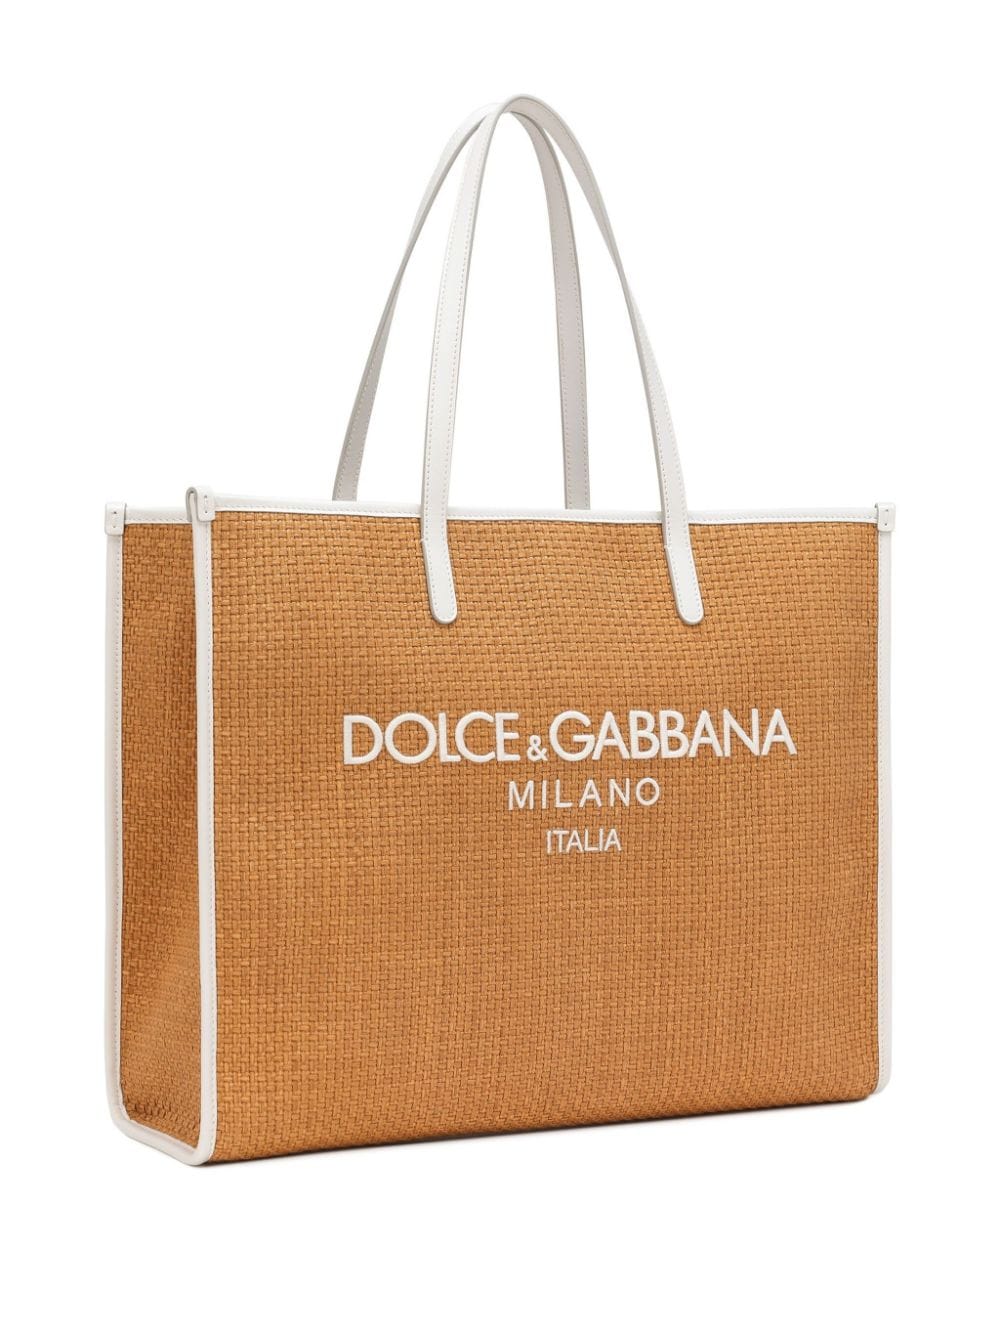 DOLCE & GABBANA Luxurious Woven Tote Handbag with Leather Trim in Rich Caramel Brown and Milk White